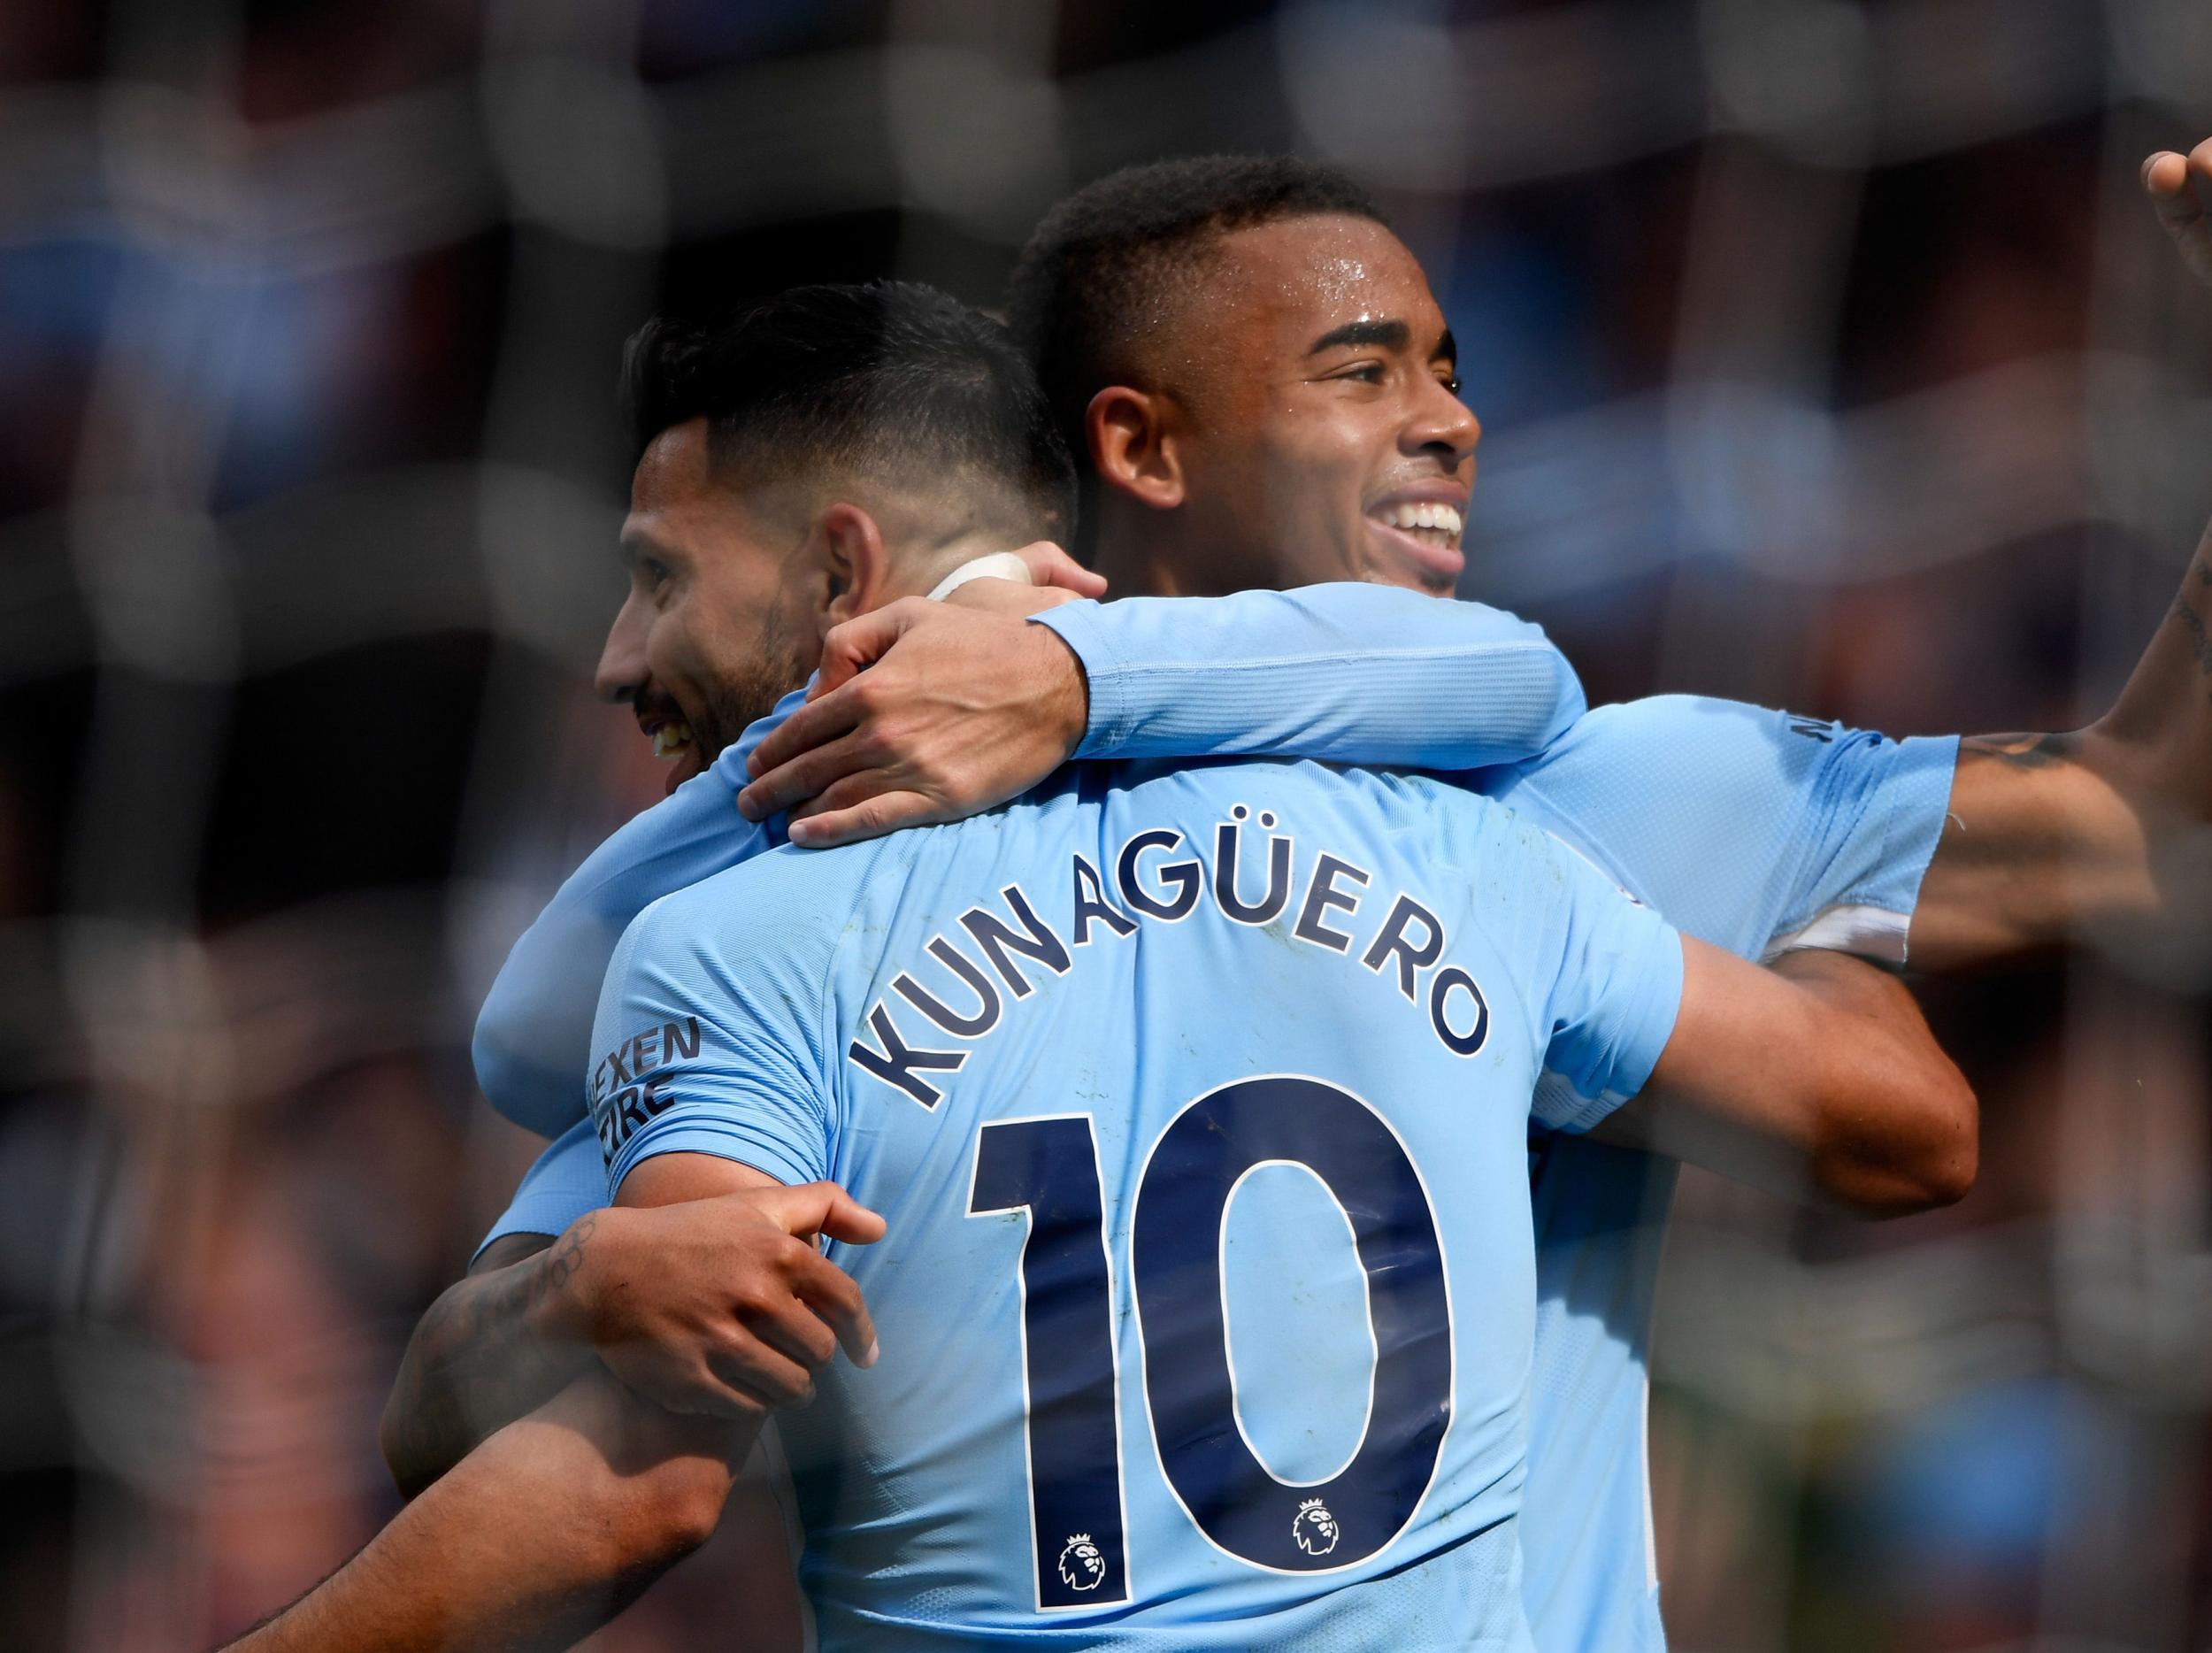 Jesus and Aguero in turn are both thriving as City's focal point